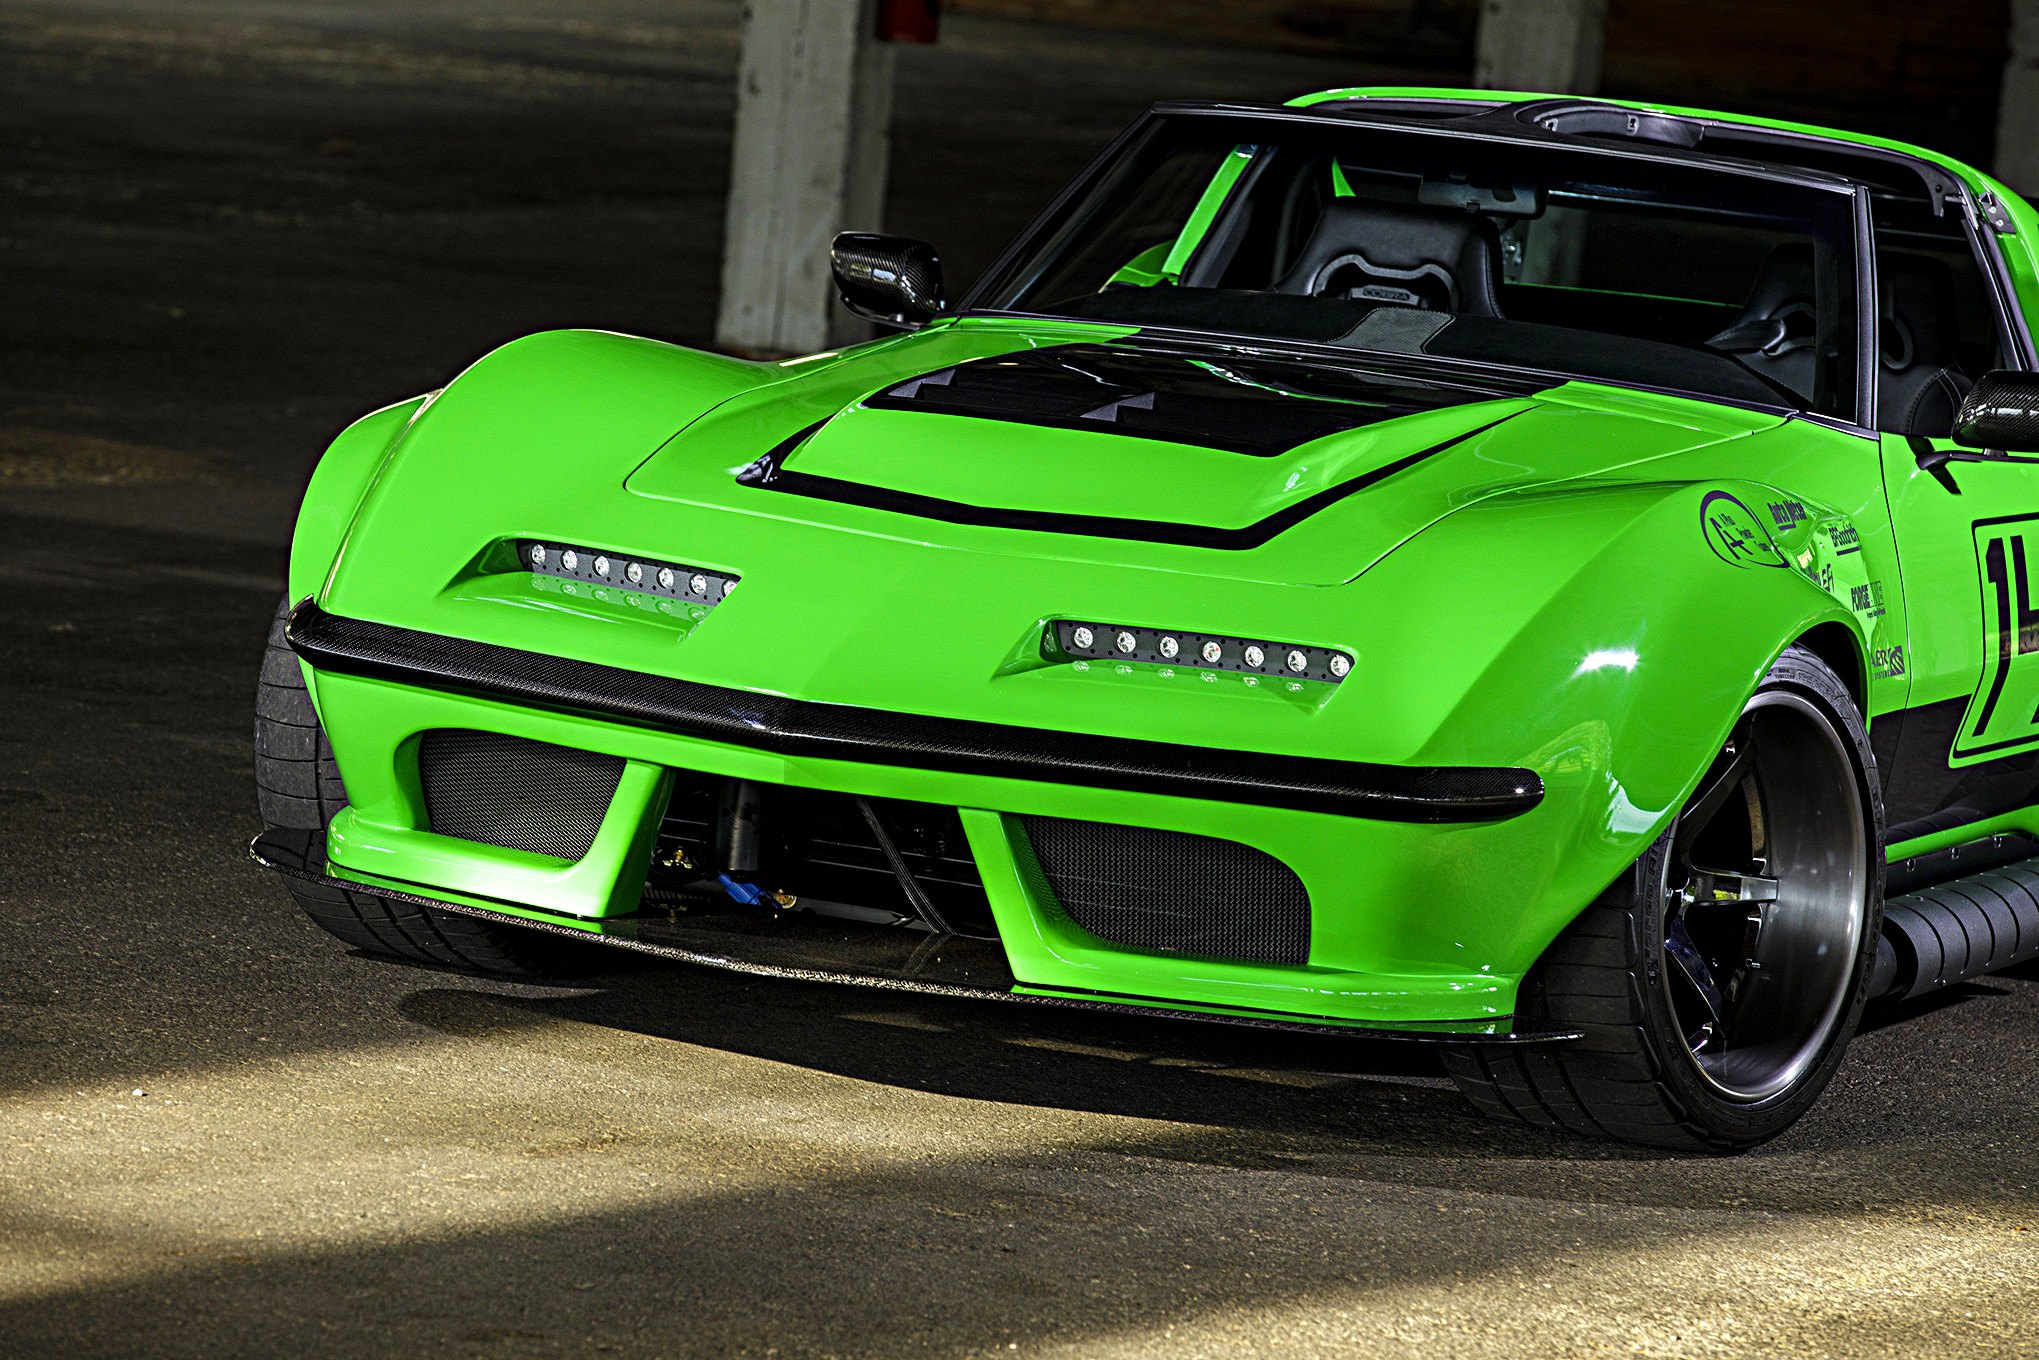 Green Debadged Chevy Corvette with Custom Headlights - Photo by Robert McGaffin